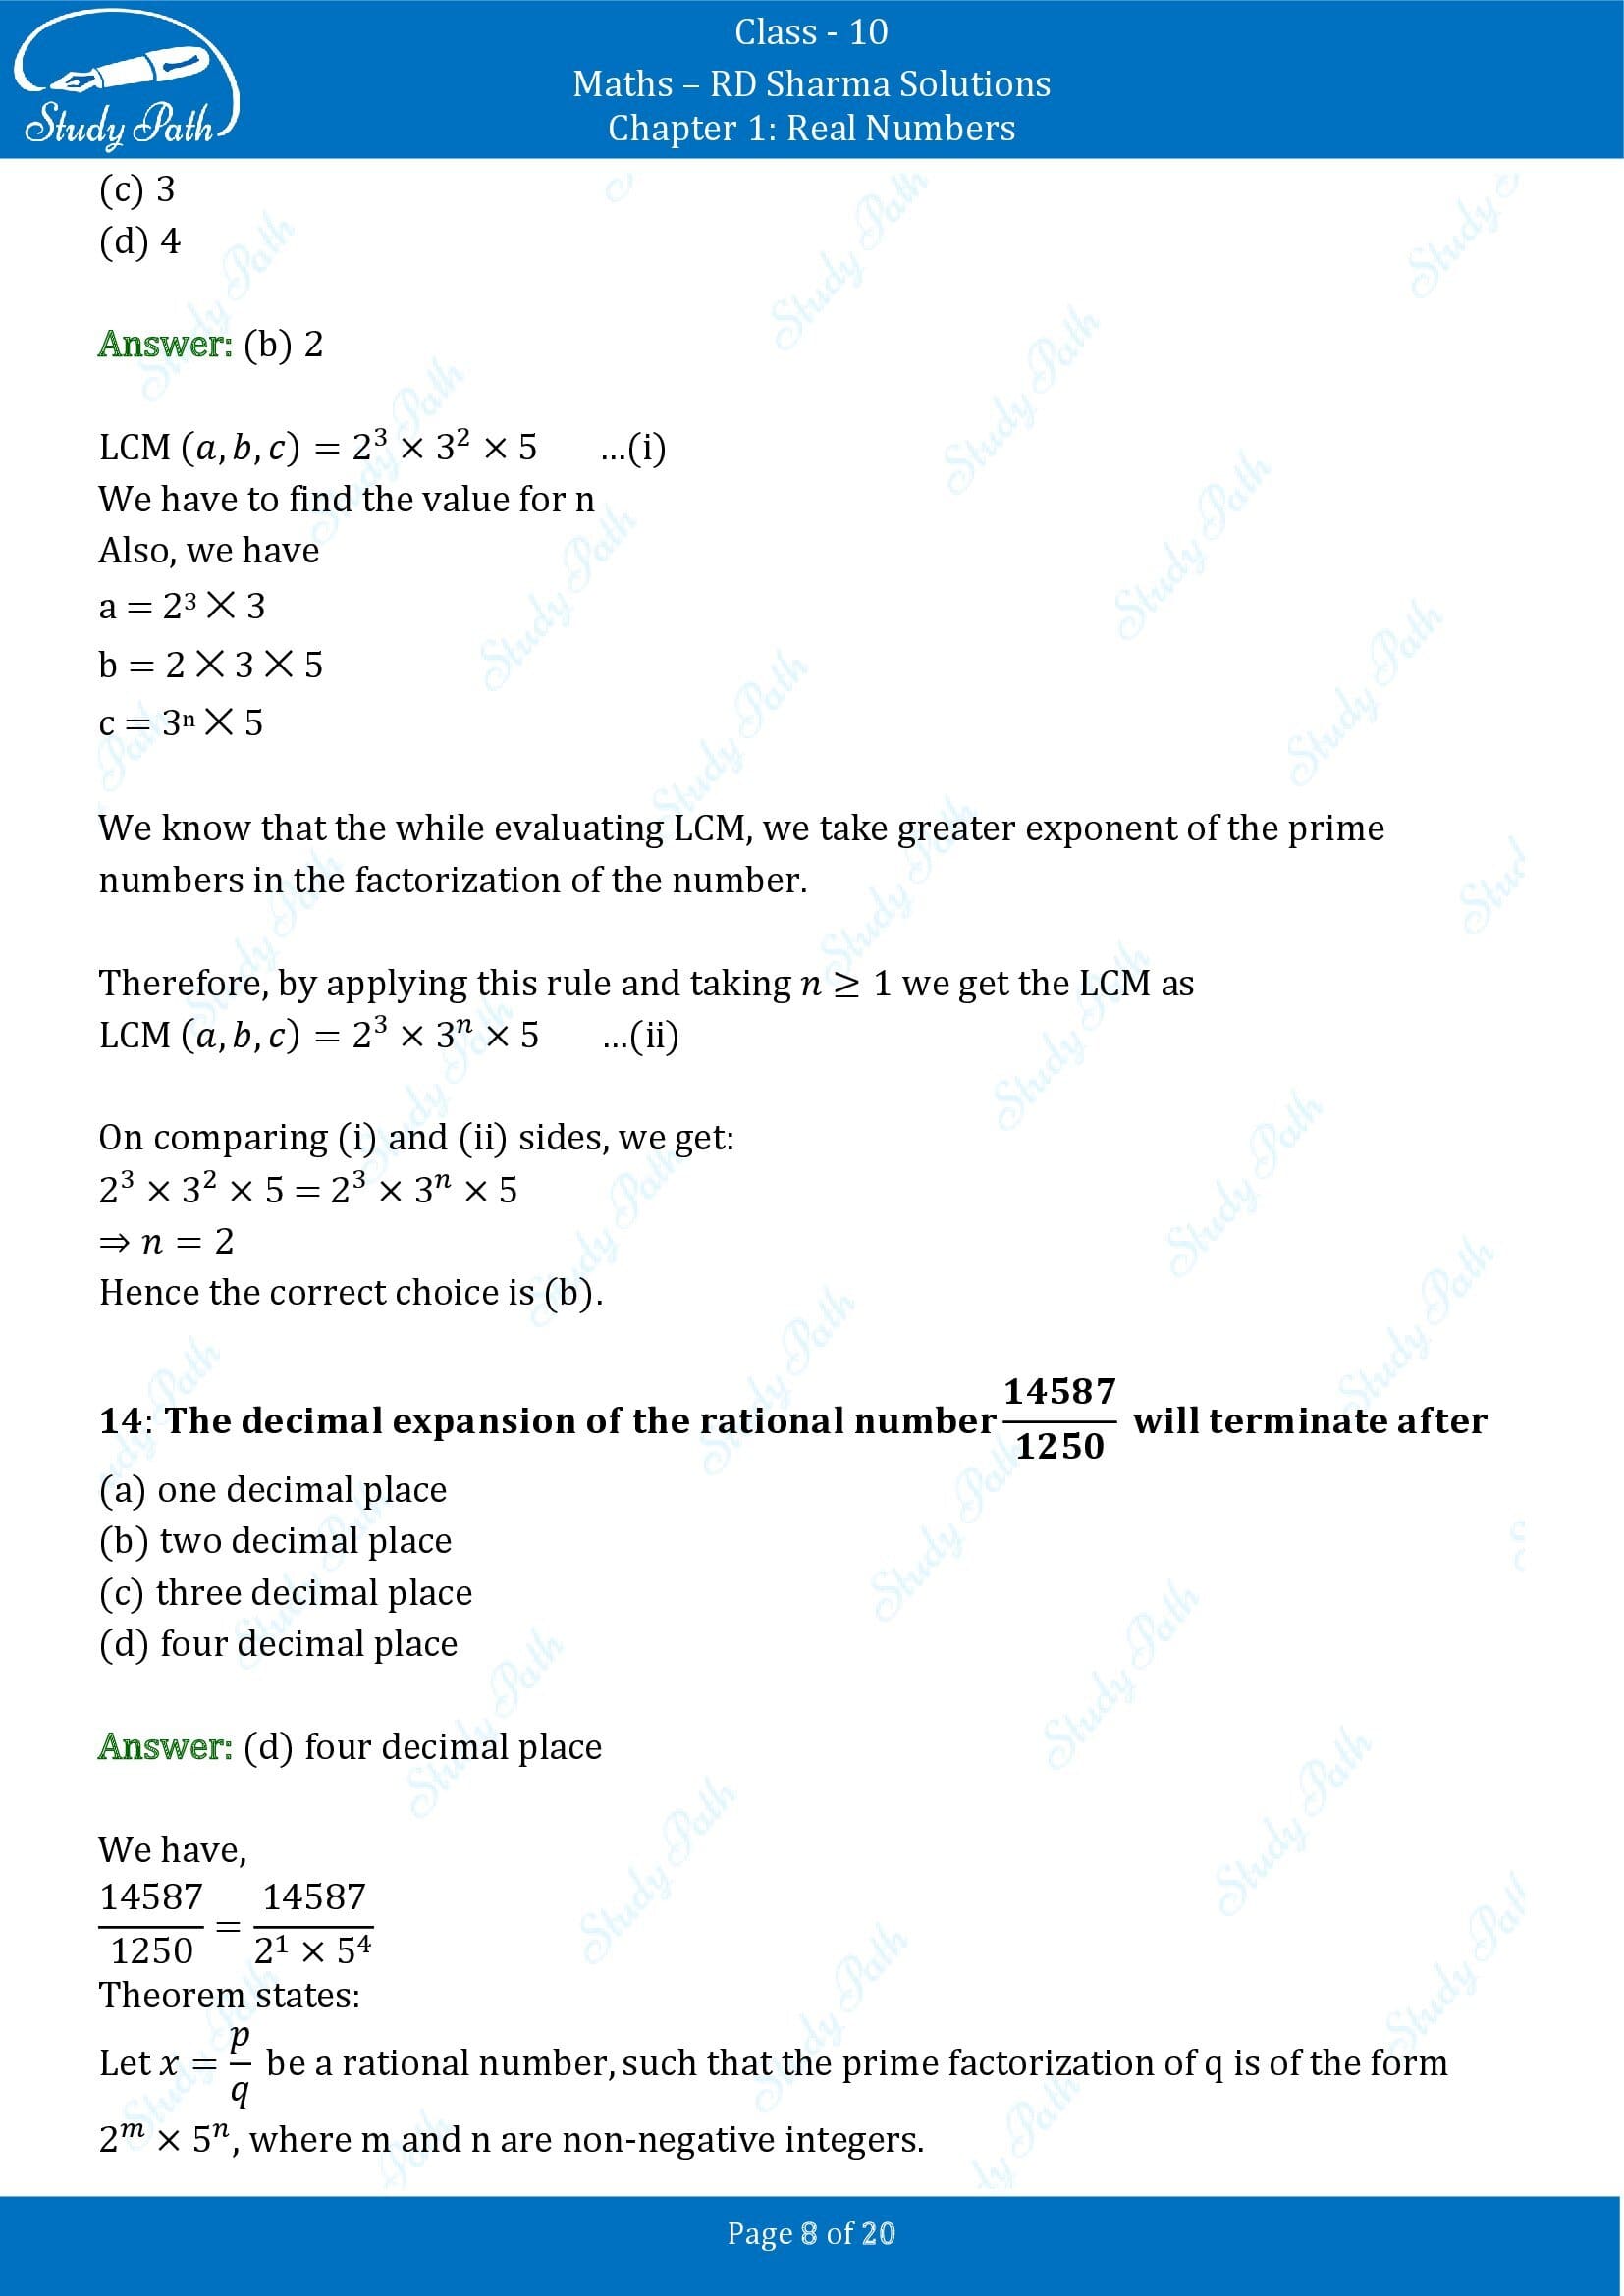 RD Sharma Solutions Class 10 Chapter 1 Real Numbers Multiple Choice Questions MCQs 00008